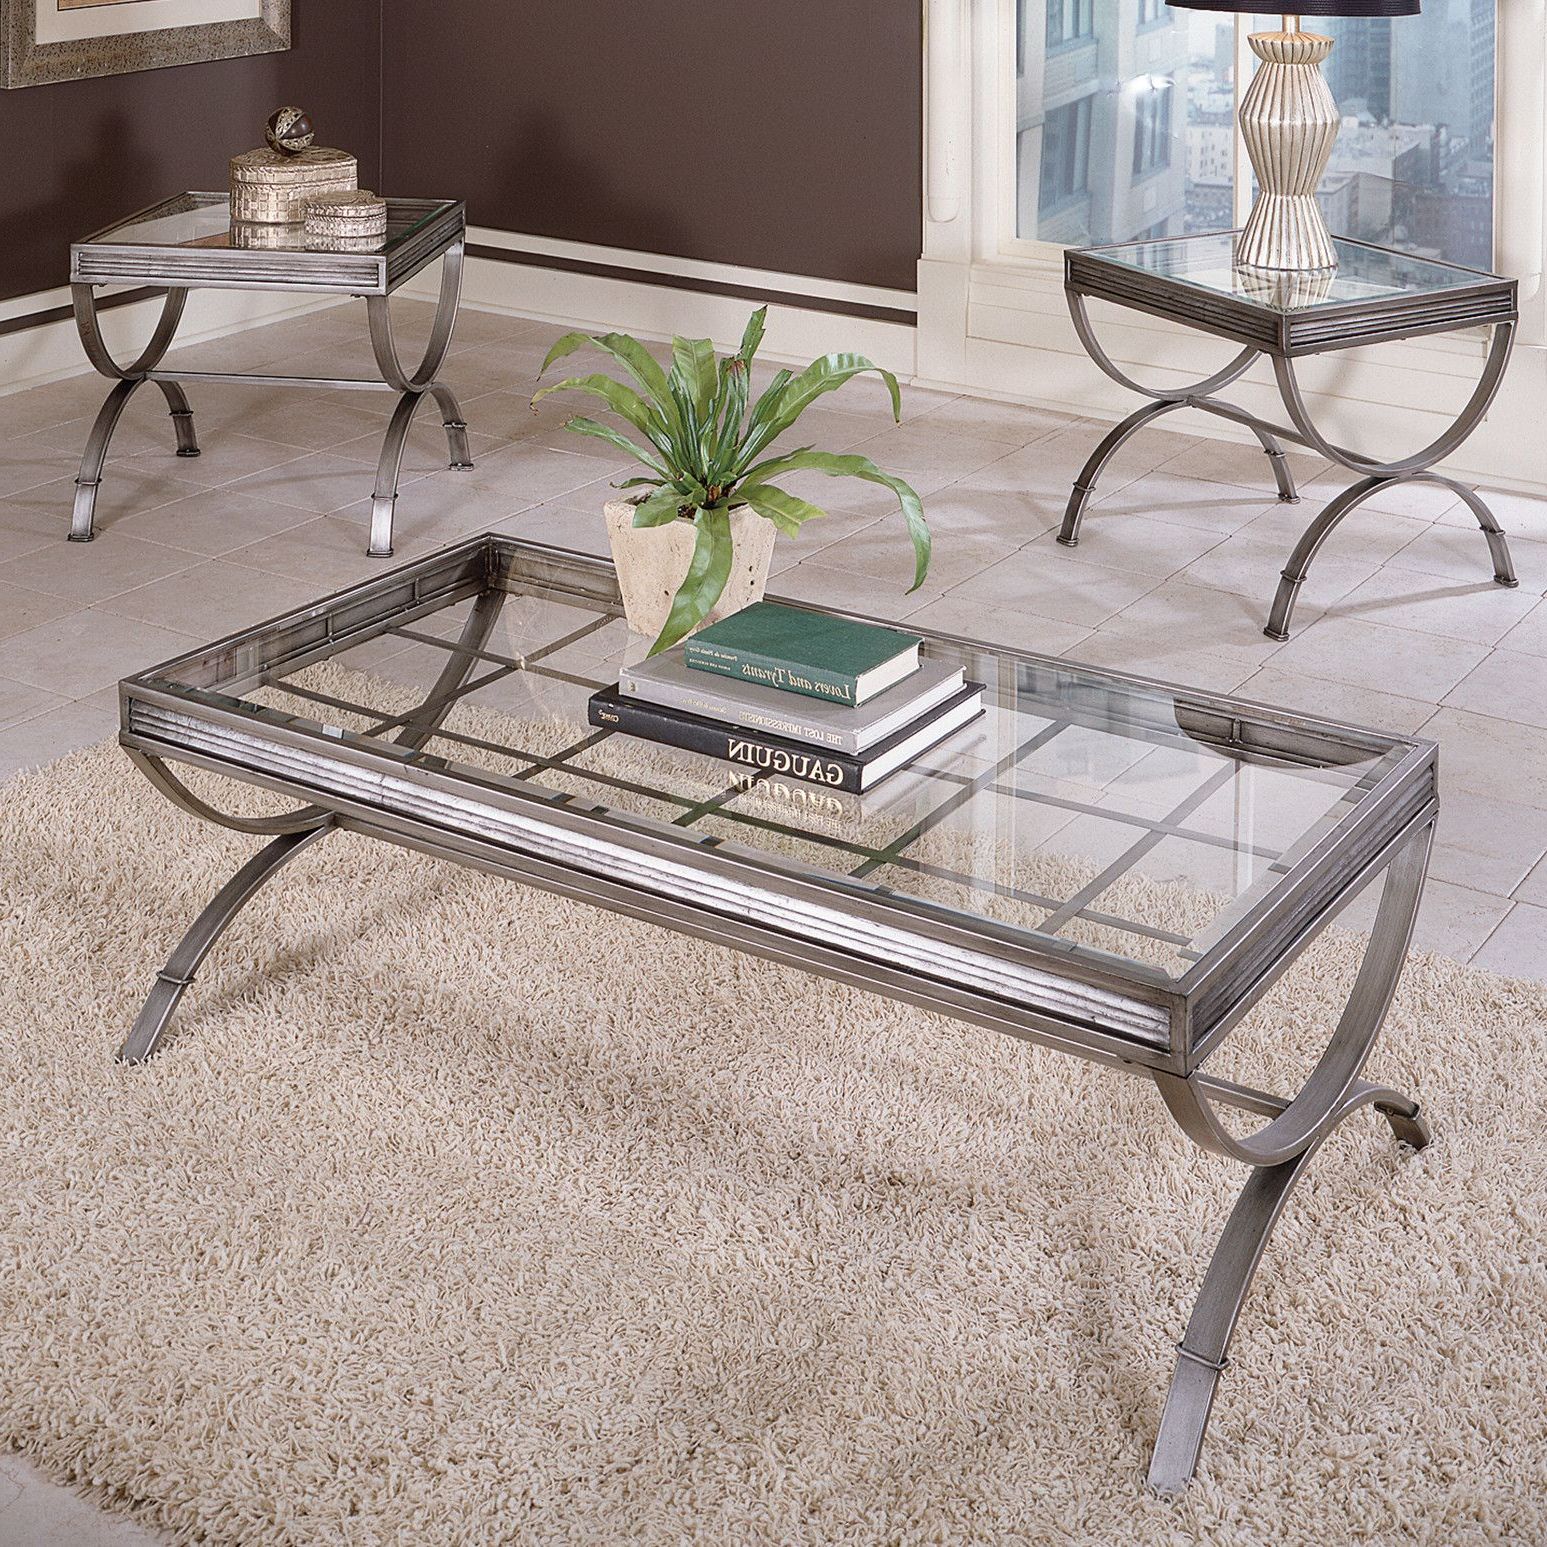 Fashionable Steve Silver Furniture Emerson 3 Piece Coffee Table Set Regarding 3 Piece Coffee Tables (View 9 of 20)